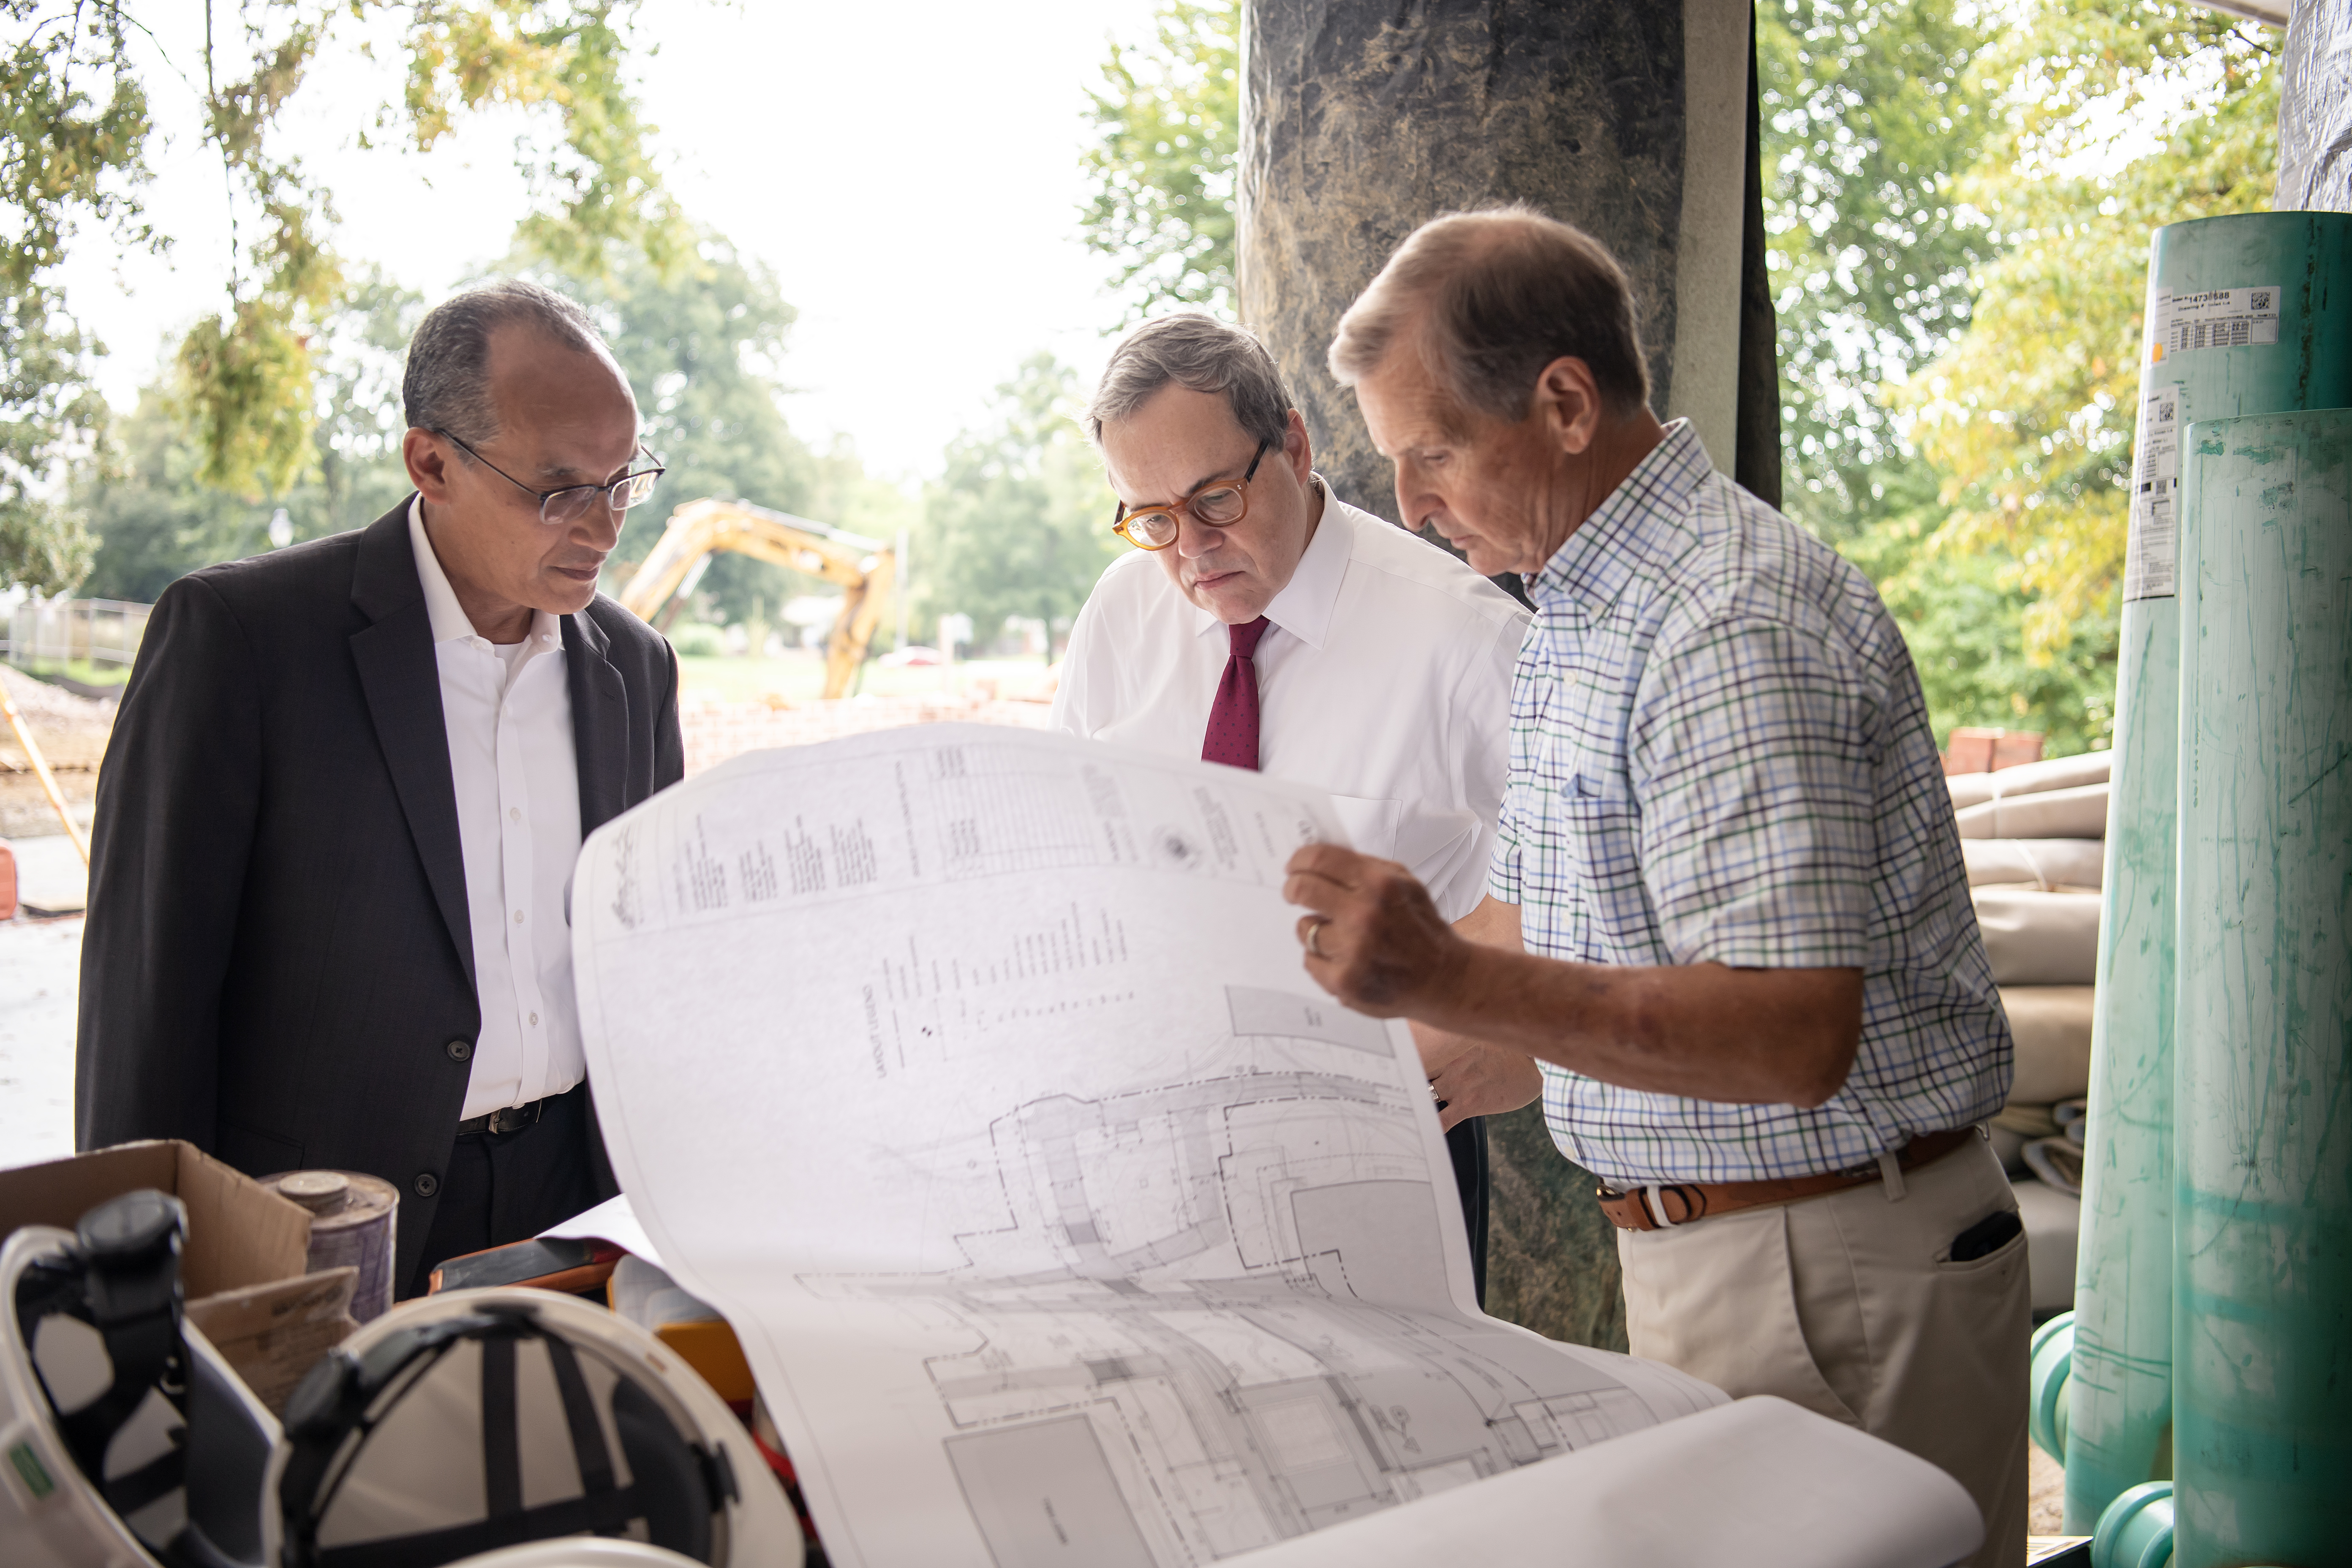 Ed Patrick, Mike Sosulski, and Vic Costa review plans for the library terrace renovation